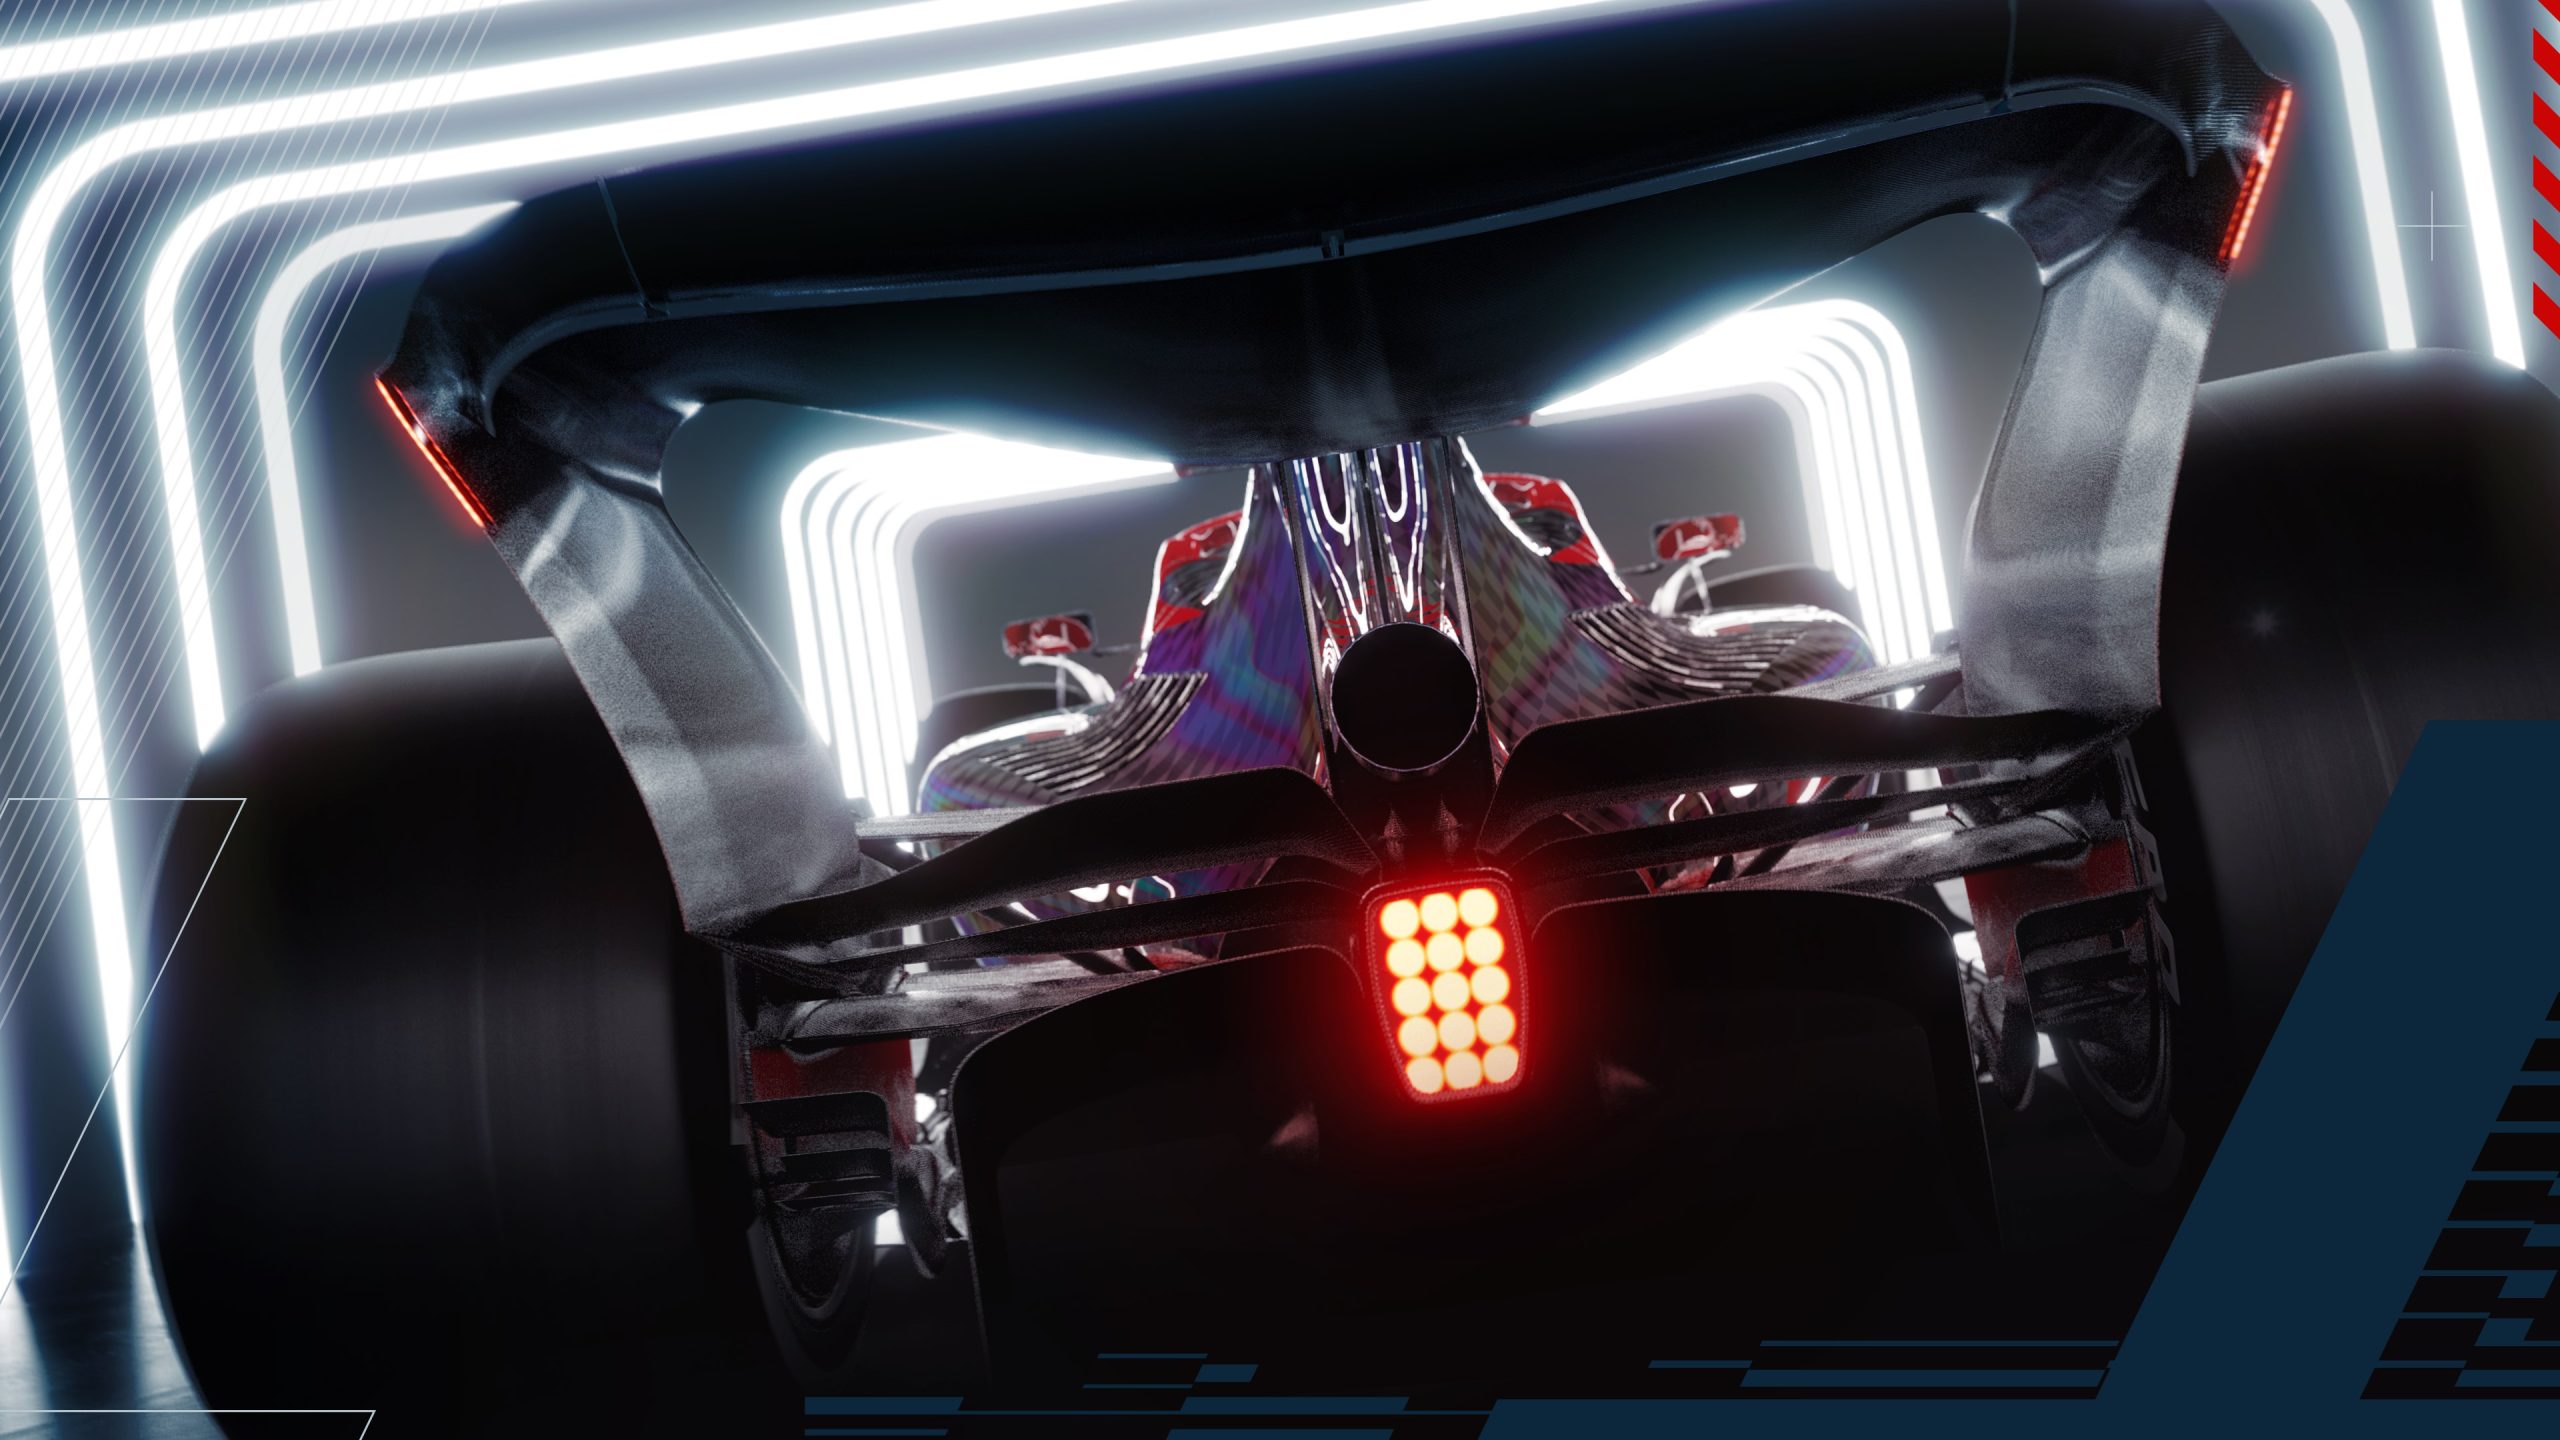 New F1 22 gameplay trailer showcases Race Weekend, F1 Life and Supercars TheXboxHub